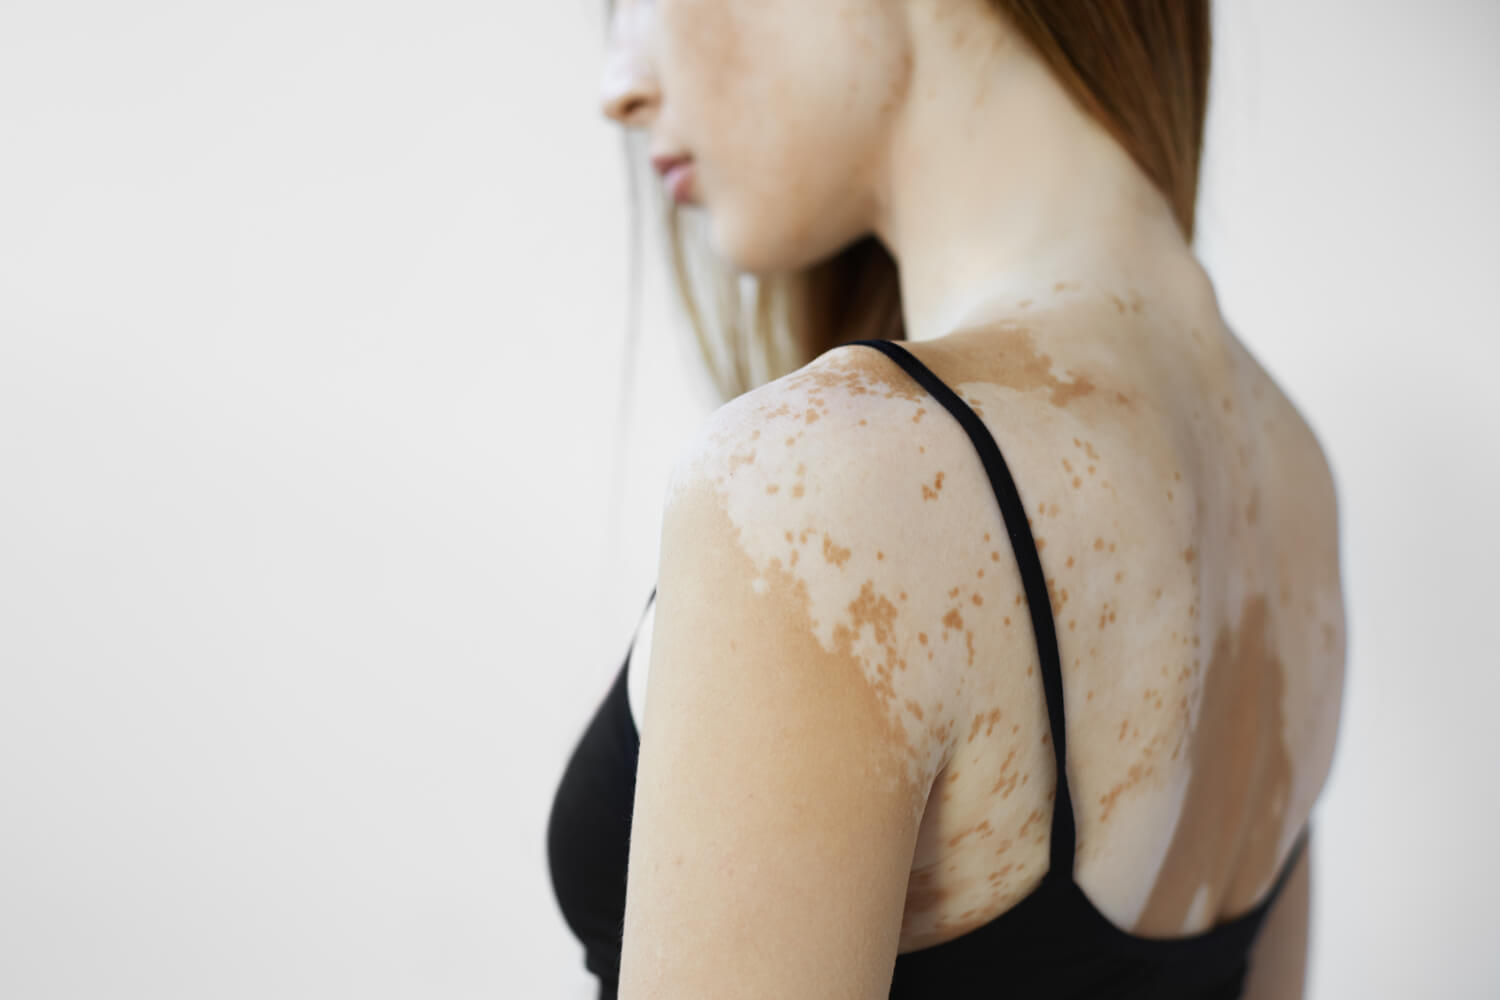 Woman with discolored skin on her back caused by vitiligo